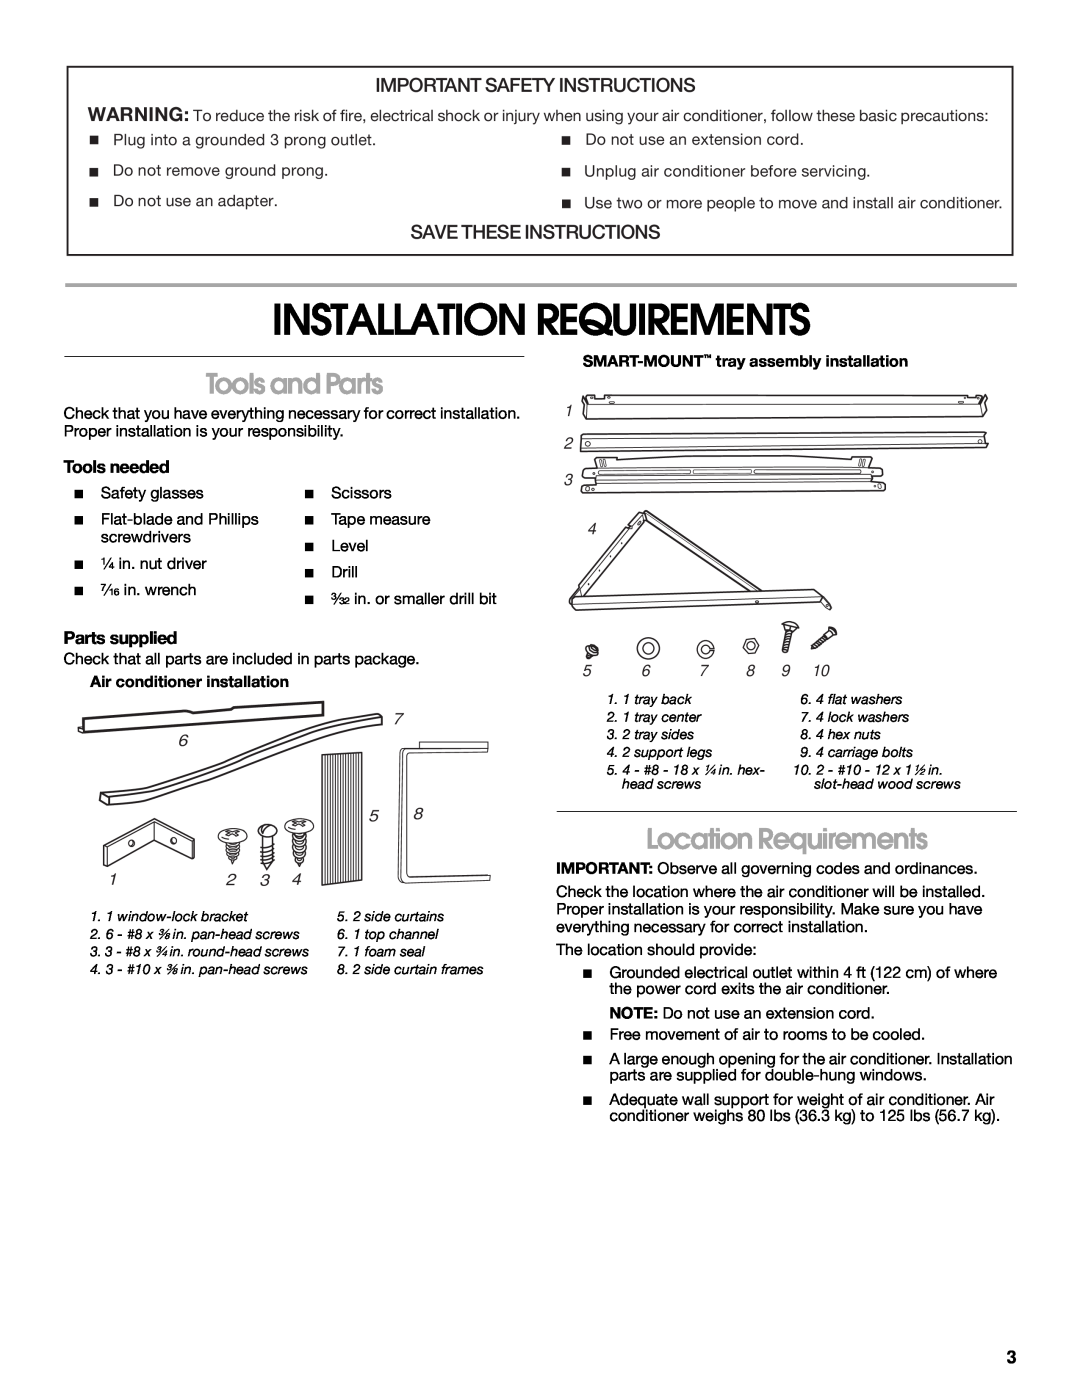 Whirlpool 1187361 manual Installation Requirements, Tools and Parts, Location Requirements, Important Safety Instructions 